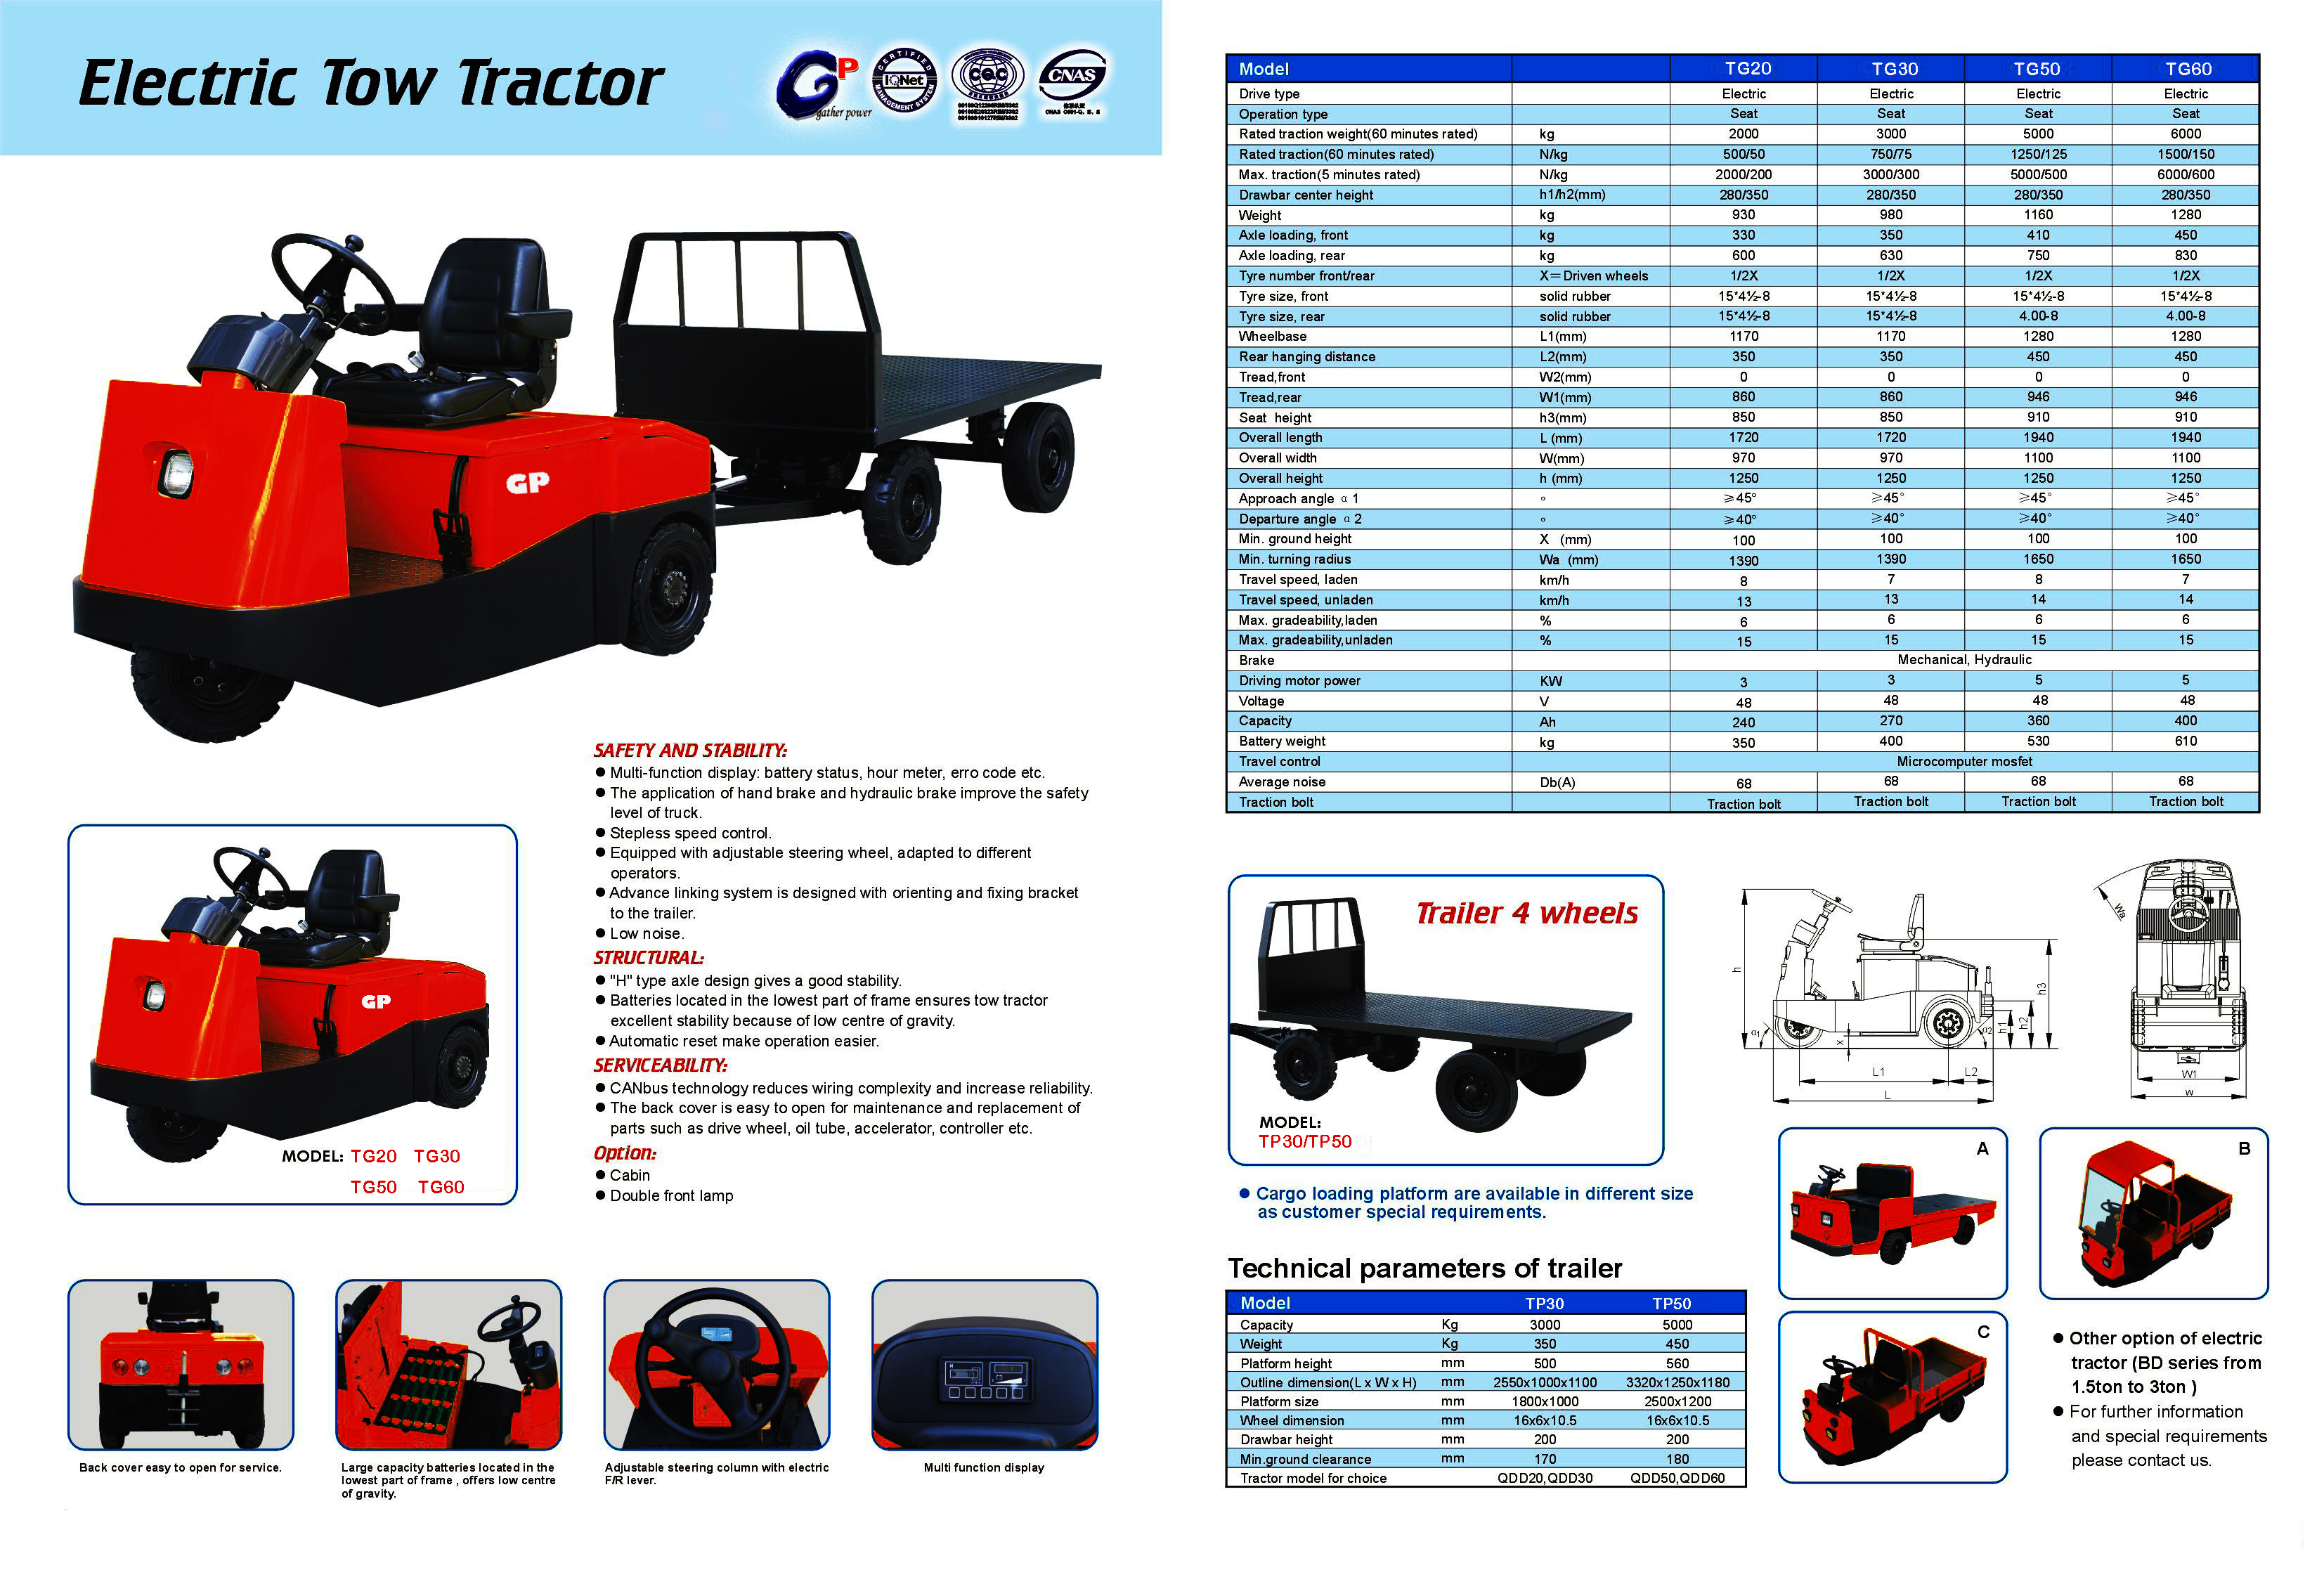 electrictractor